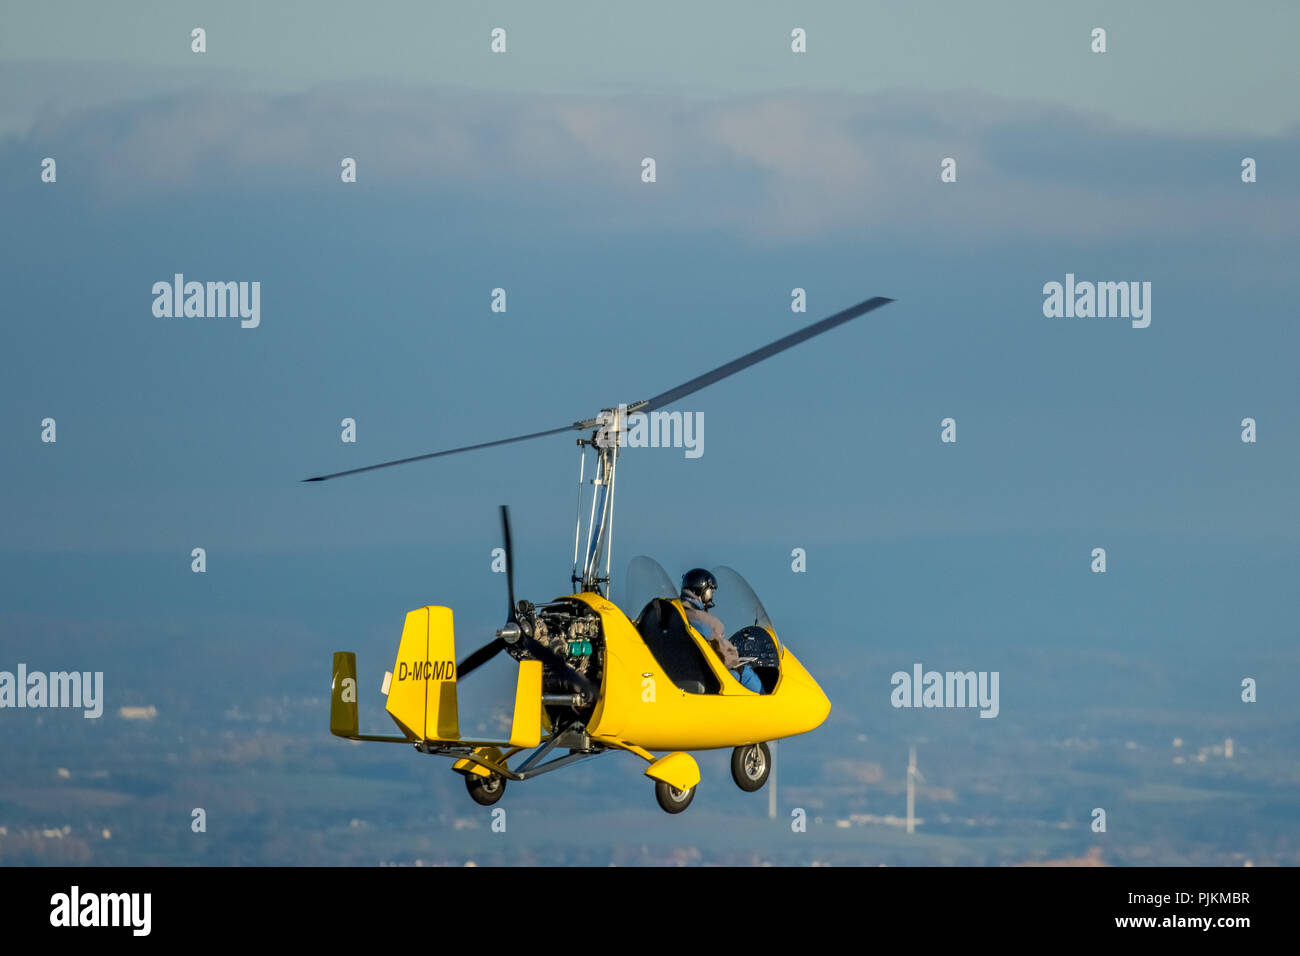 Gyrocopter over Witten, D-MCMD, microlight, sports equipment, flying, Witten, Ruhr area, North Rhine-Westphalia, Germany Stock Photo